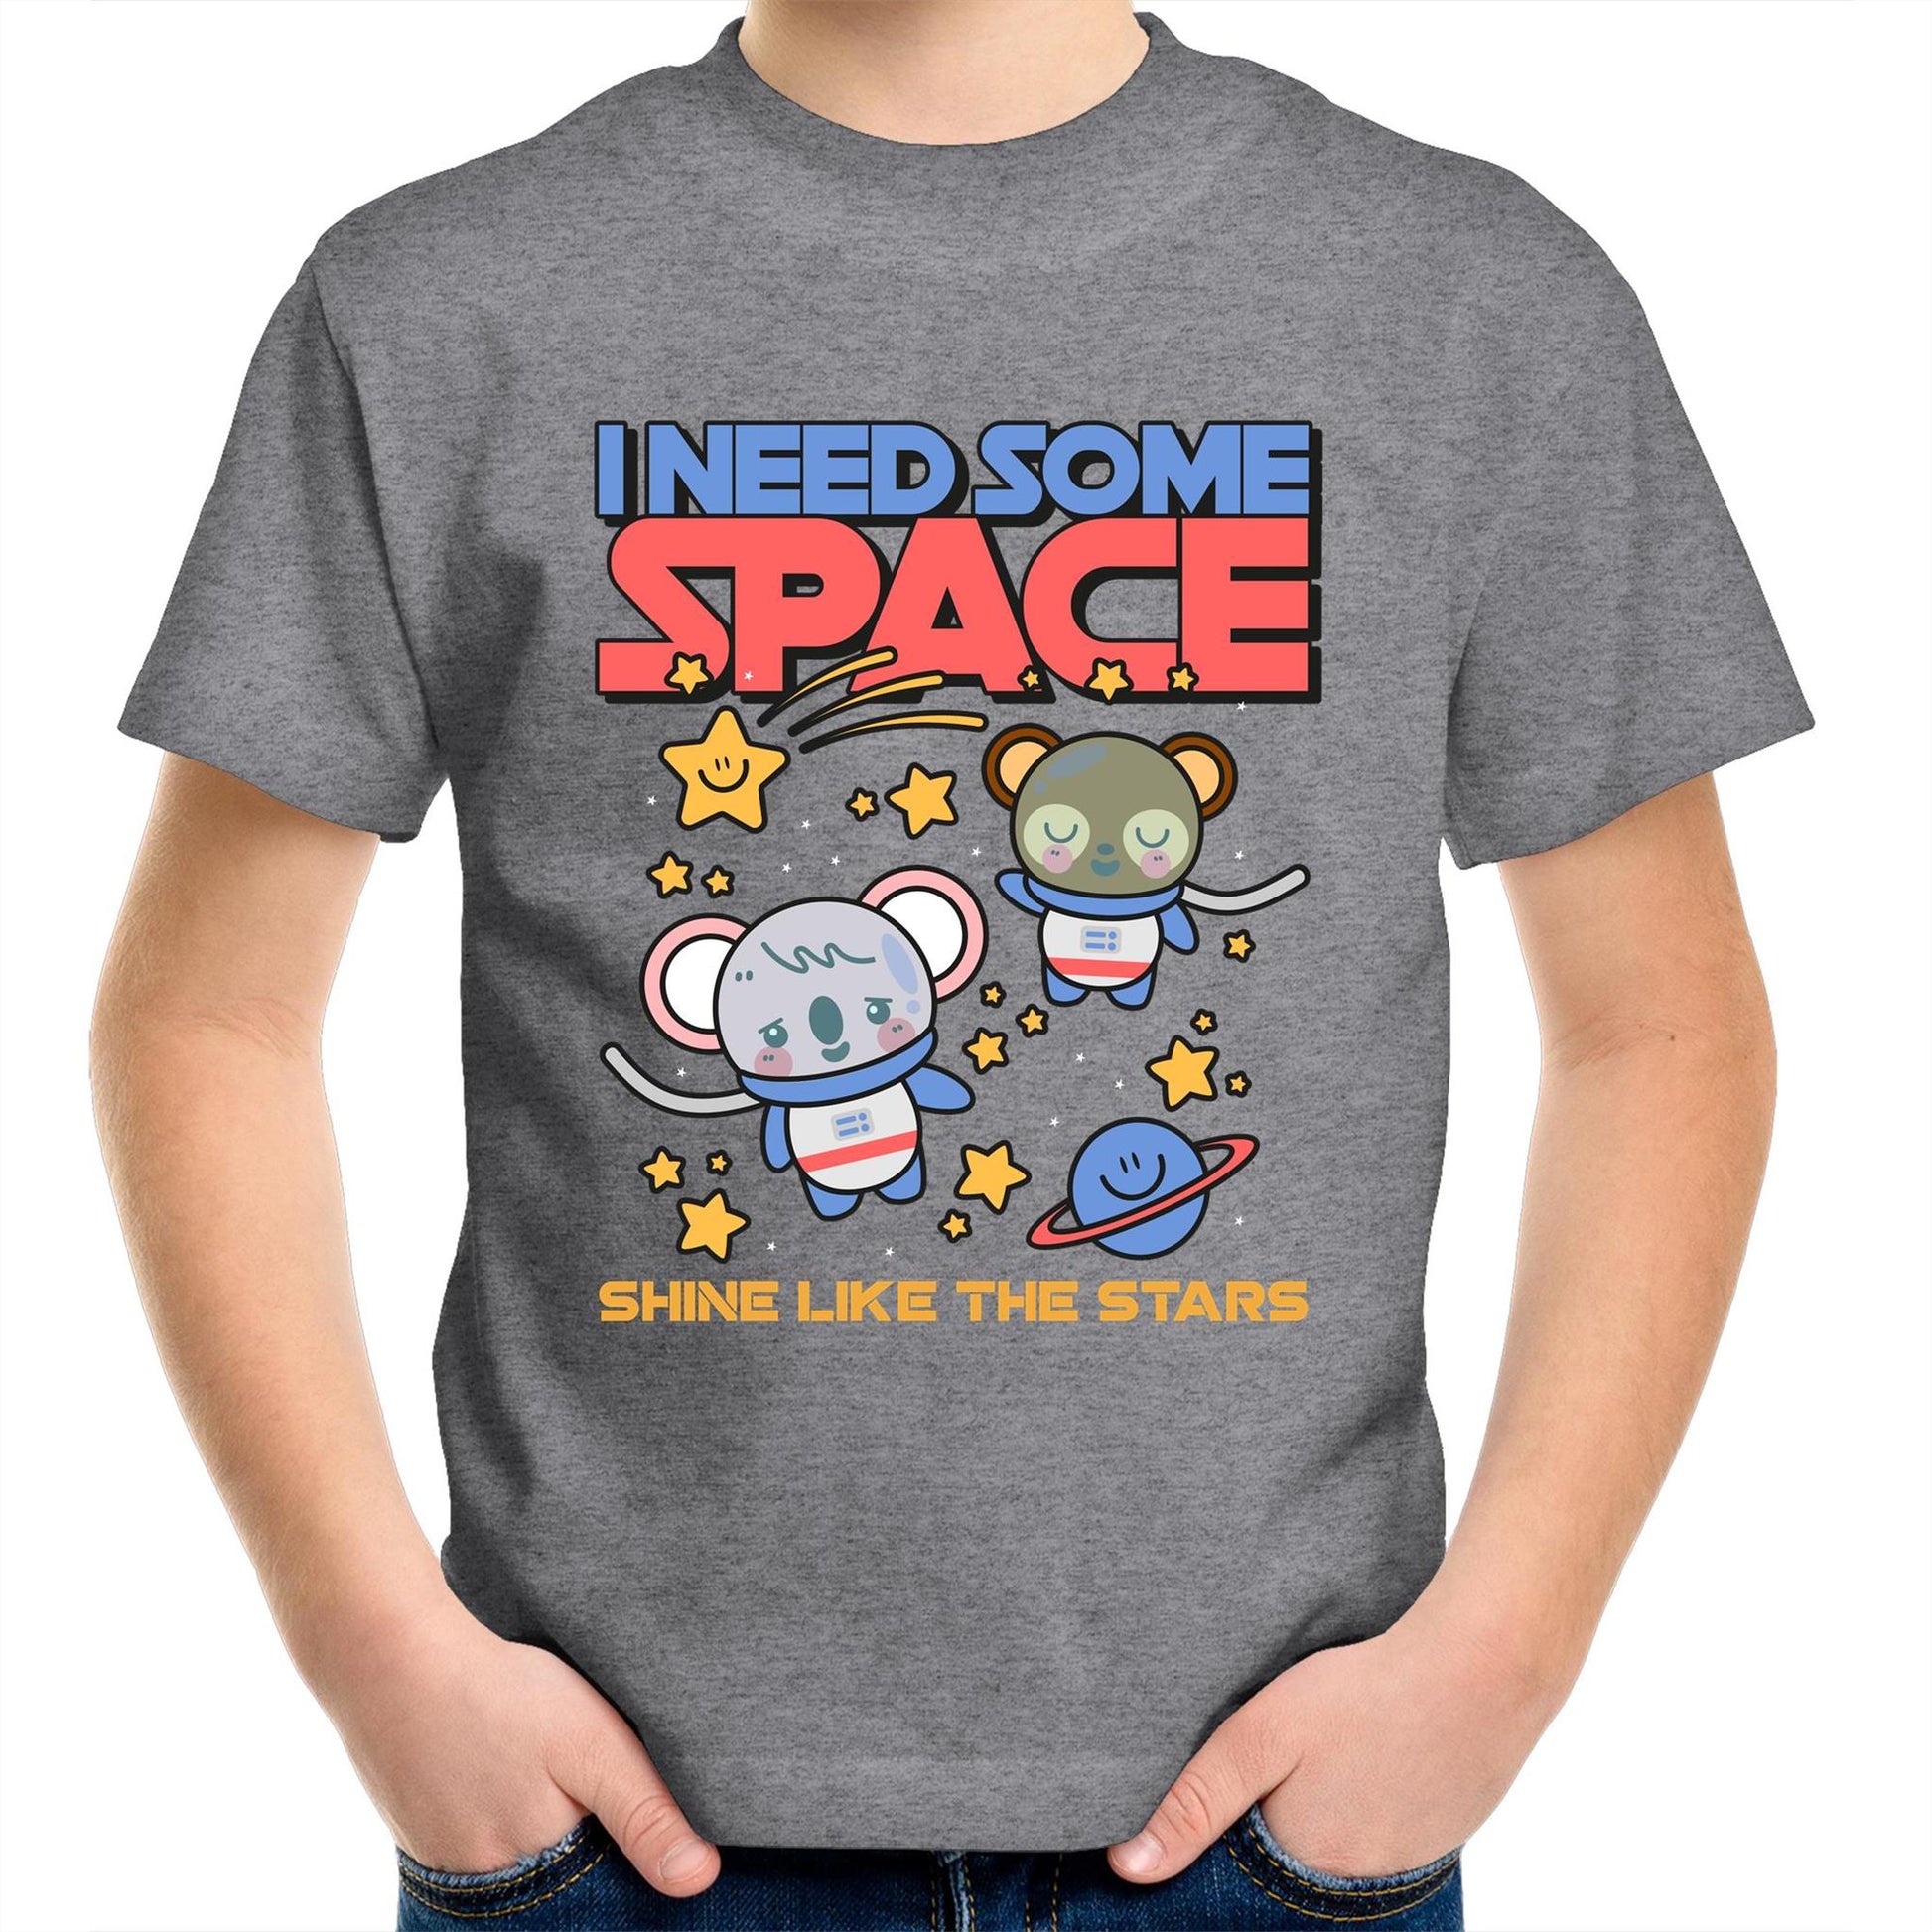 I Need Some Space - Kids Youth Crew T-Shirt Grey Marle Kids Youth T-shirt Space